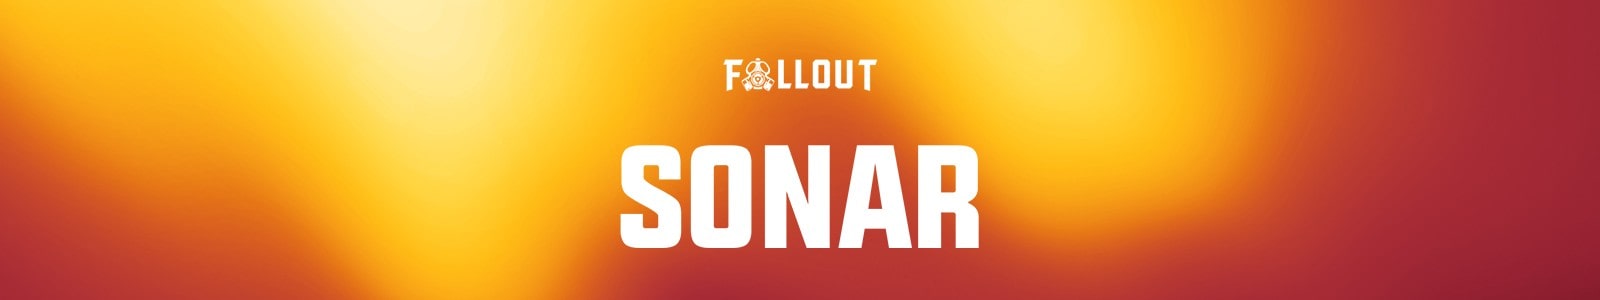 Sonar: Pings and Signatures by Fallout Music Group